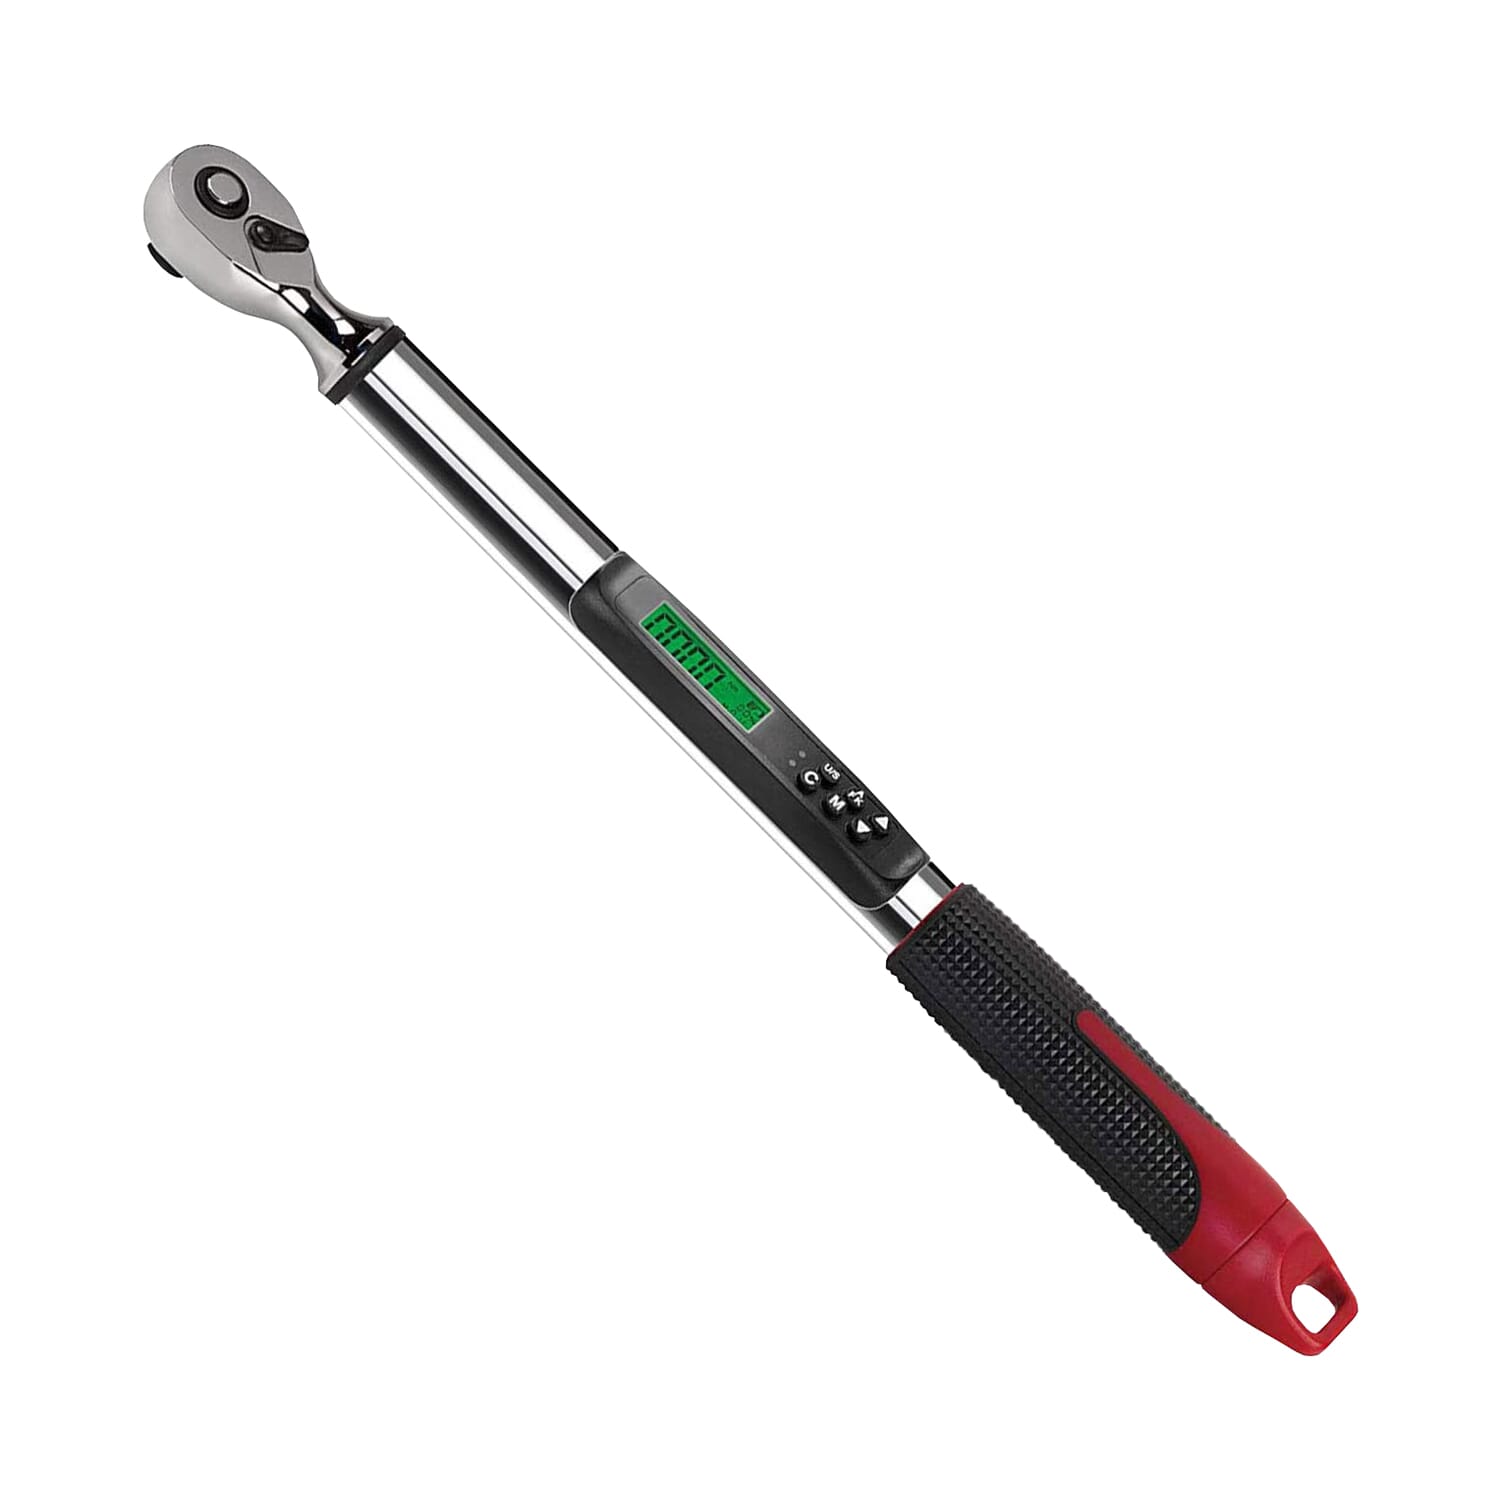 ARM317-4A 1/2" Angle Digital Torque Wrench (6.8-135 Nm) with Buzzer, Vibration & Flash Notification